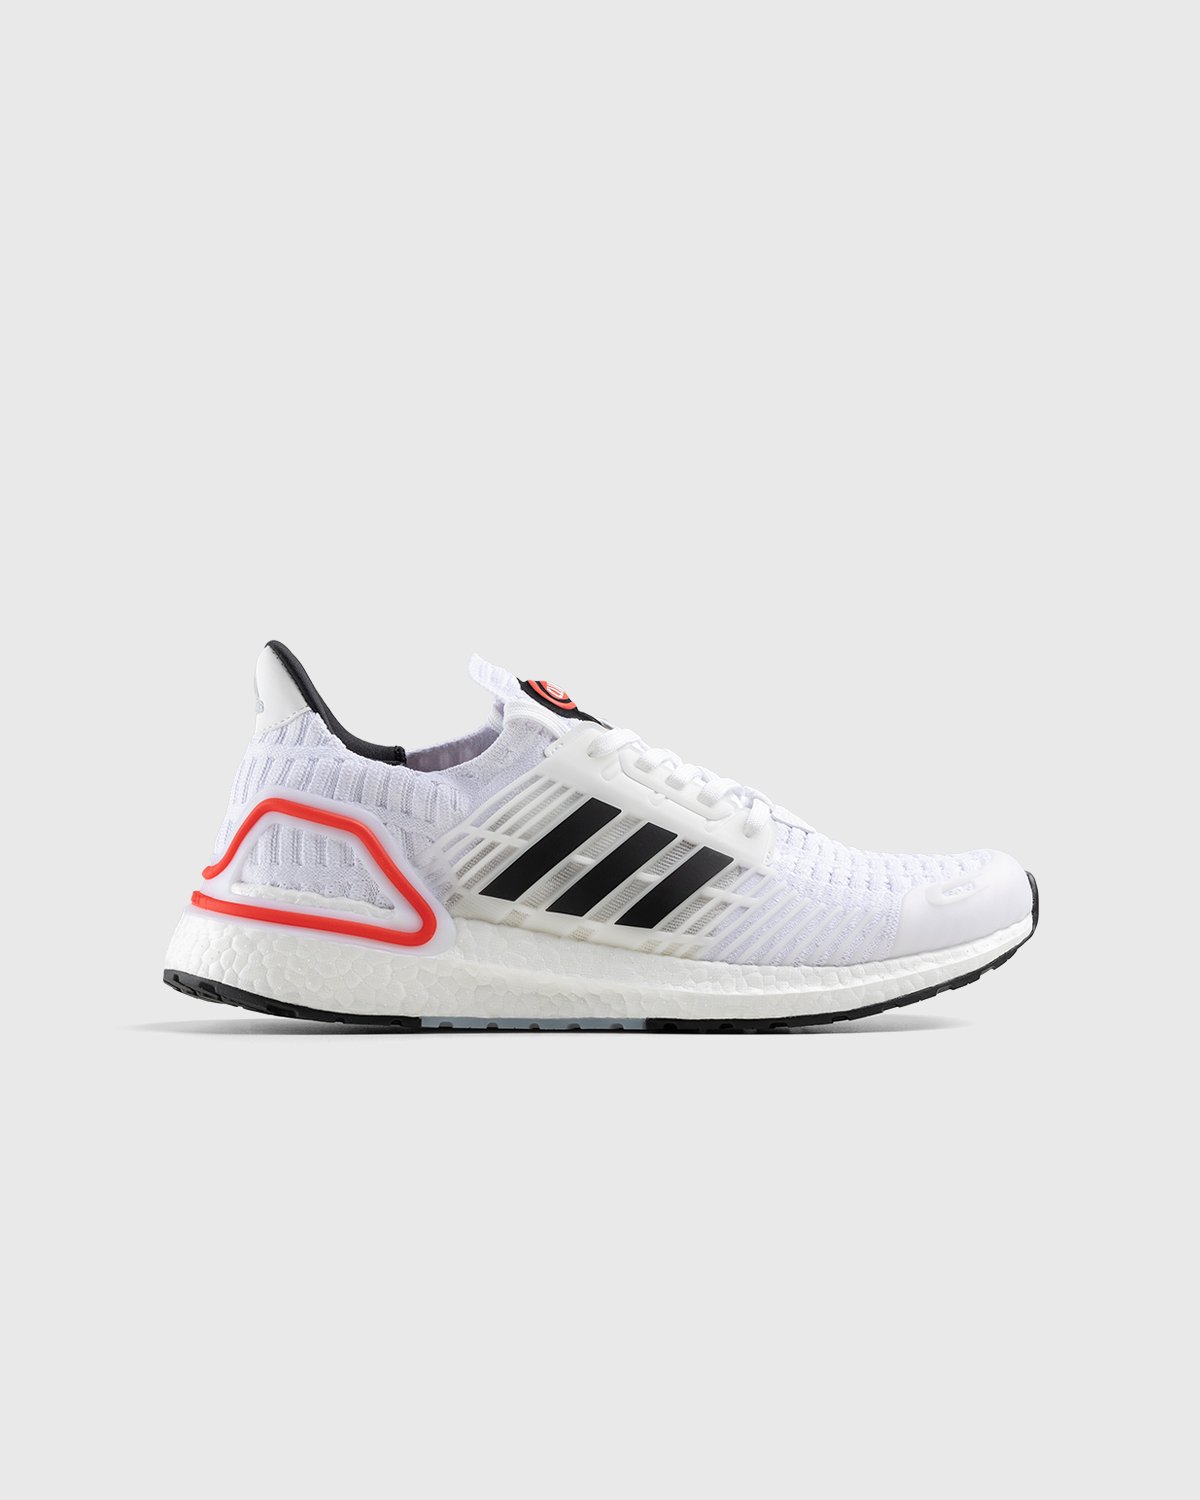 Adidas - Ultraboost Climacool 1 DNA White/Black/Red - Footwear - White - Image 1